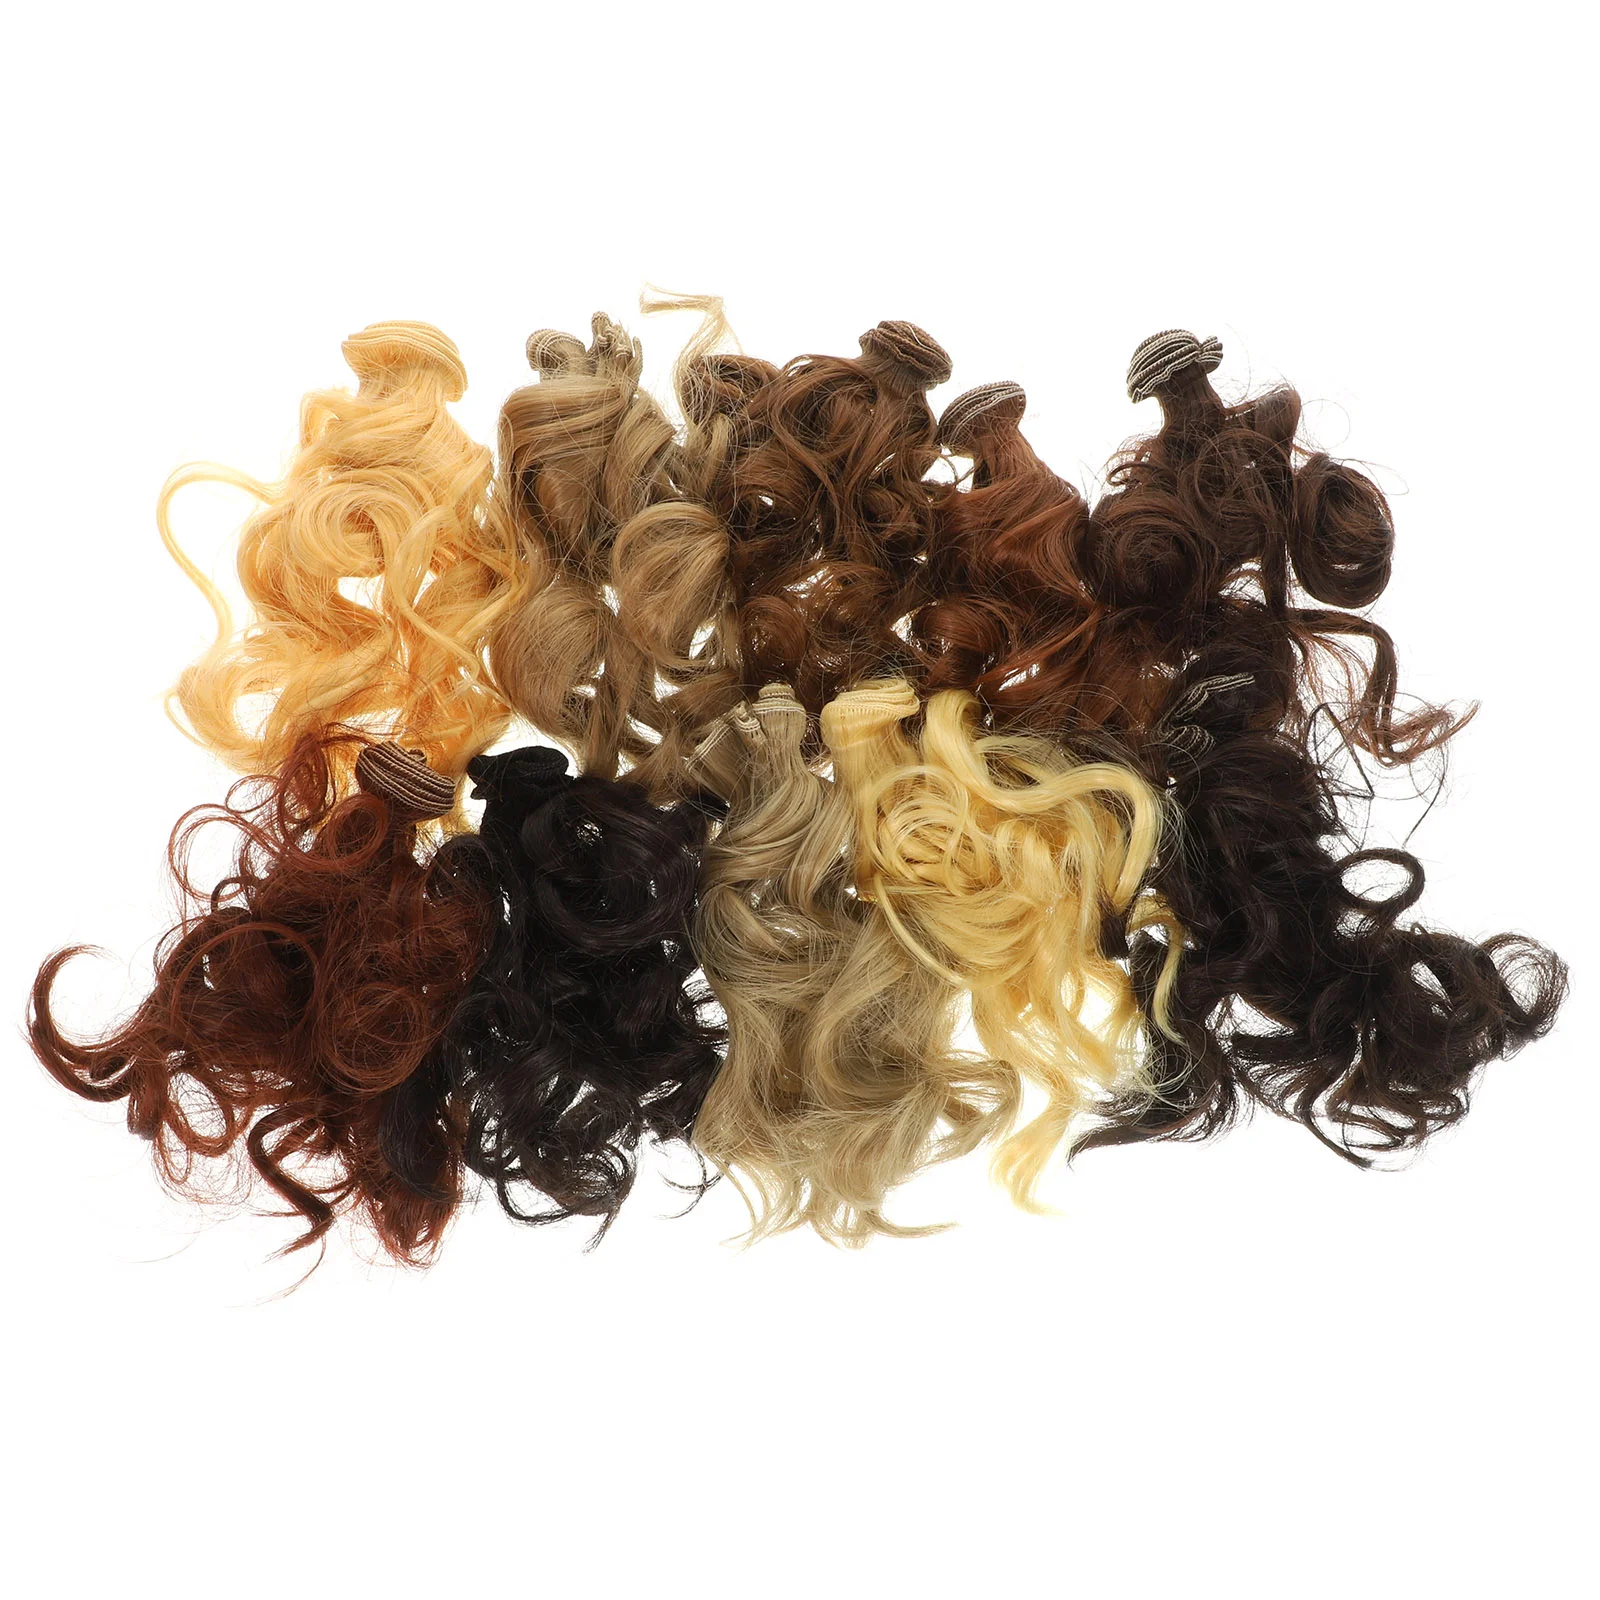 

Hair Row Wigs DIY Supplies Small Simulated Making Tool Curly Wefts